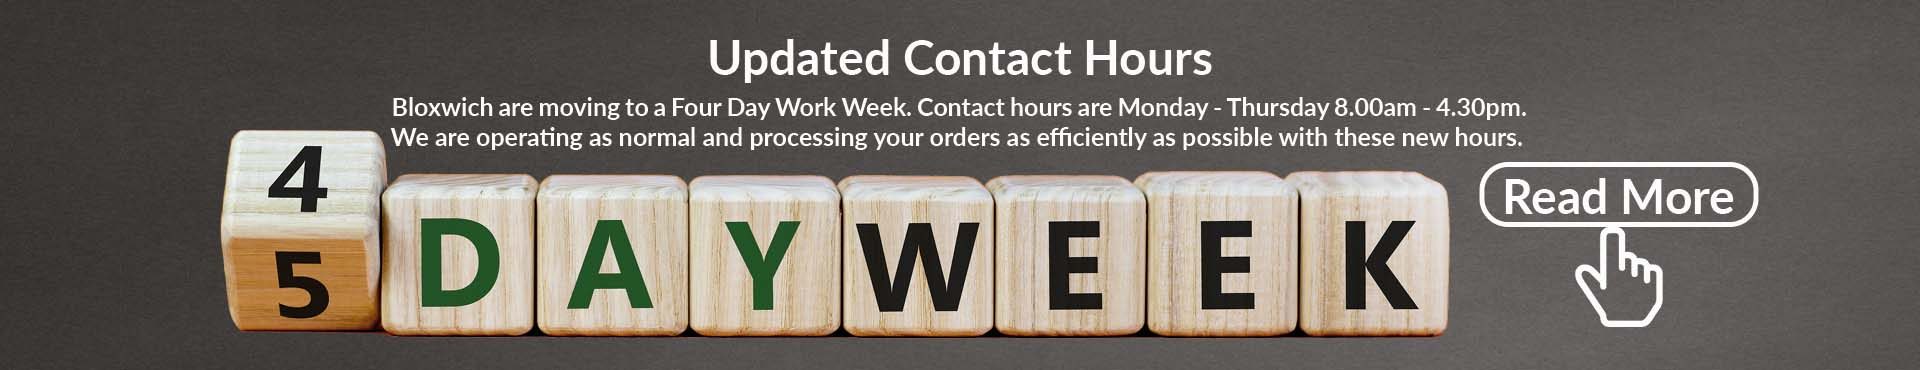 Bloxwich Stamping updated contact hours